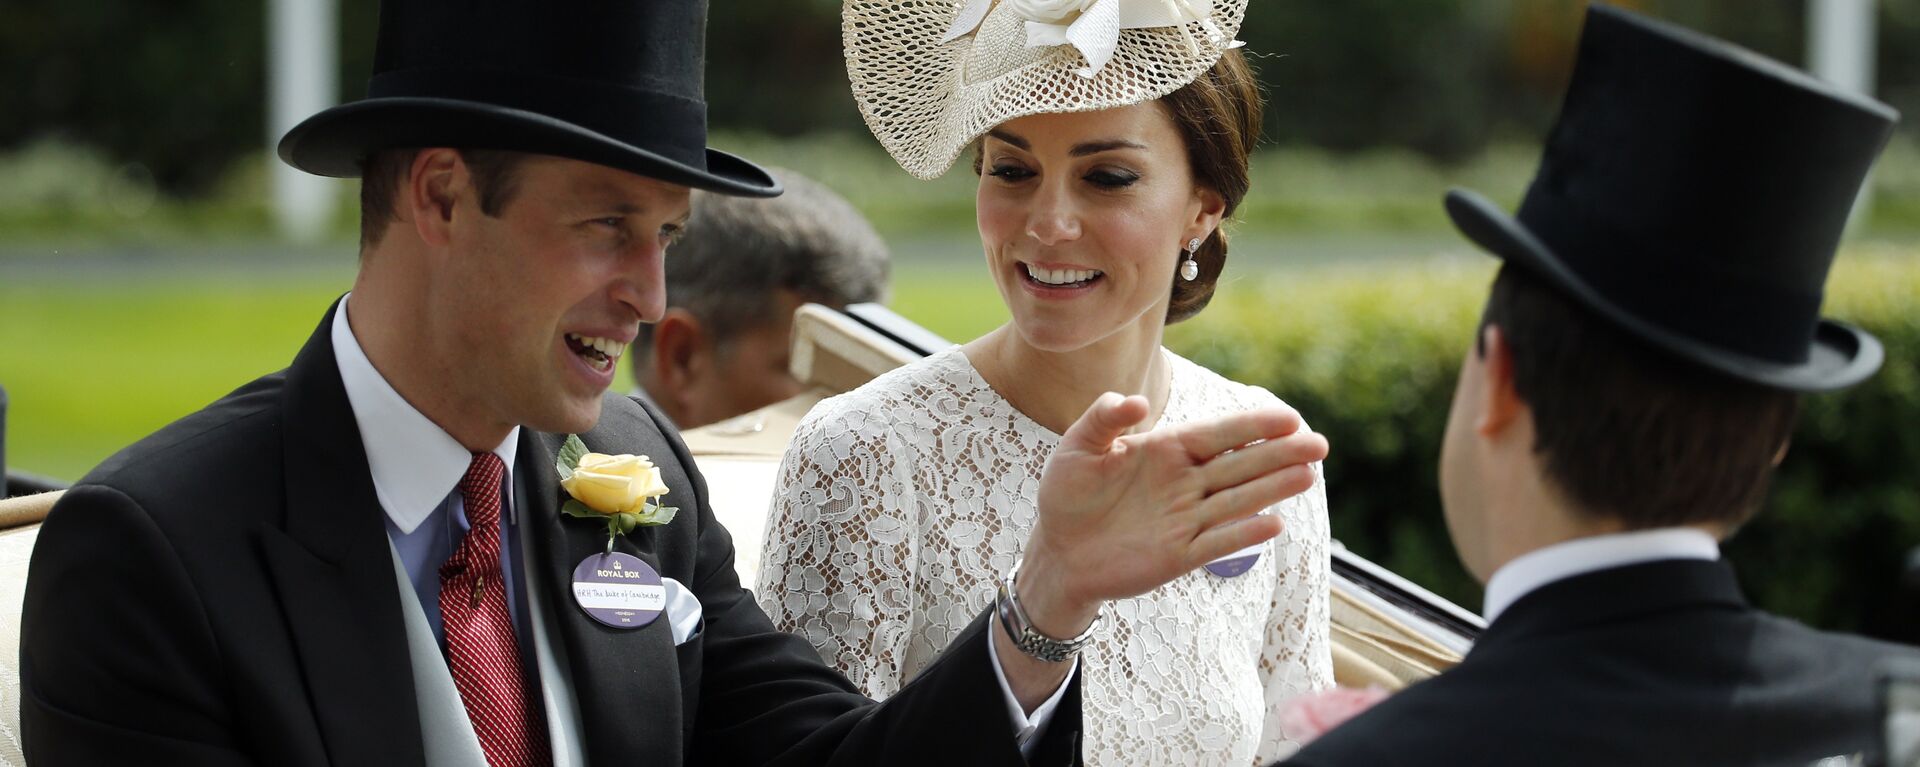 Britain's Prince William and Kate, Duchess of Cambridge arrive by carriage on the second day of the Royal Ascot horse race meeting at Ascot, England, Wednesday June 15, 2016.  - Sputnik International, 1920, 05.12.2021